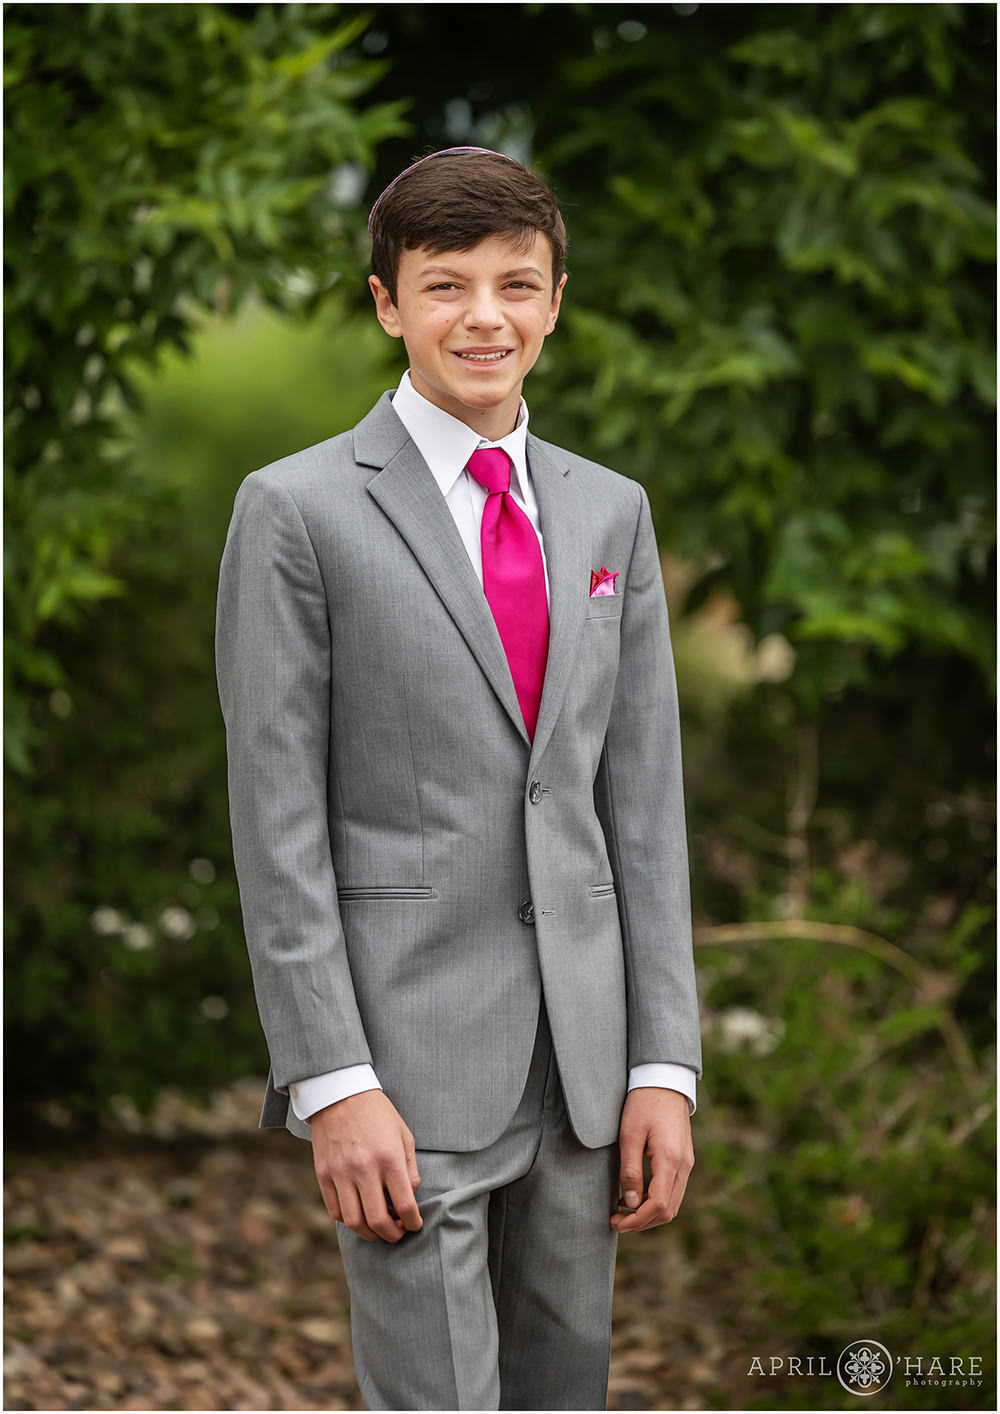 Bar mitzvah boy poses in front of some greenery in his gray suit wearing a bright pink tie at B'Nai Chaim in Lakewood